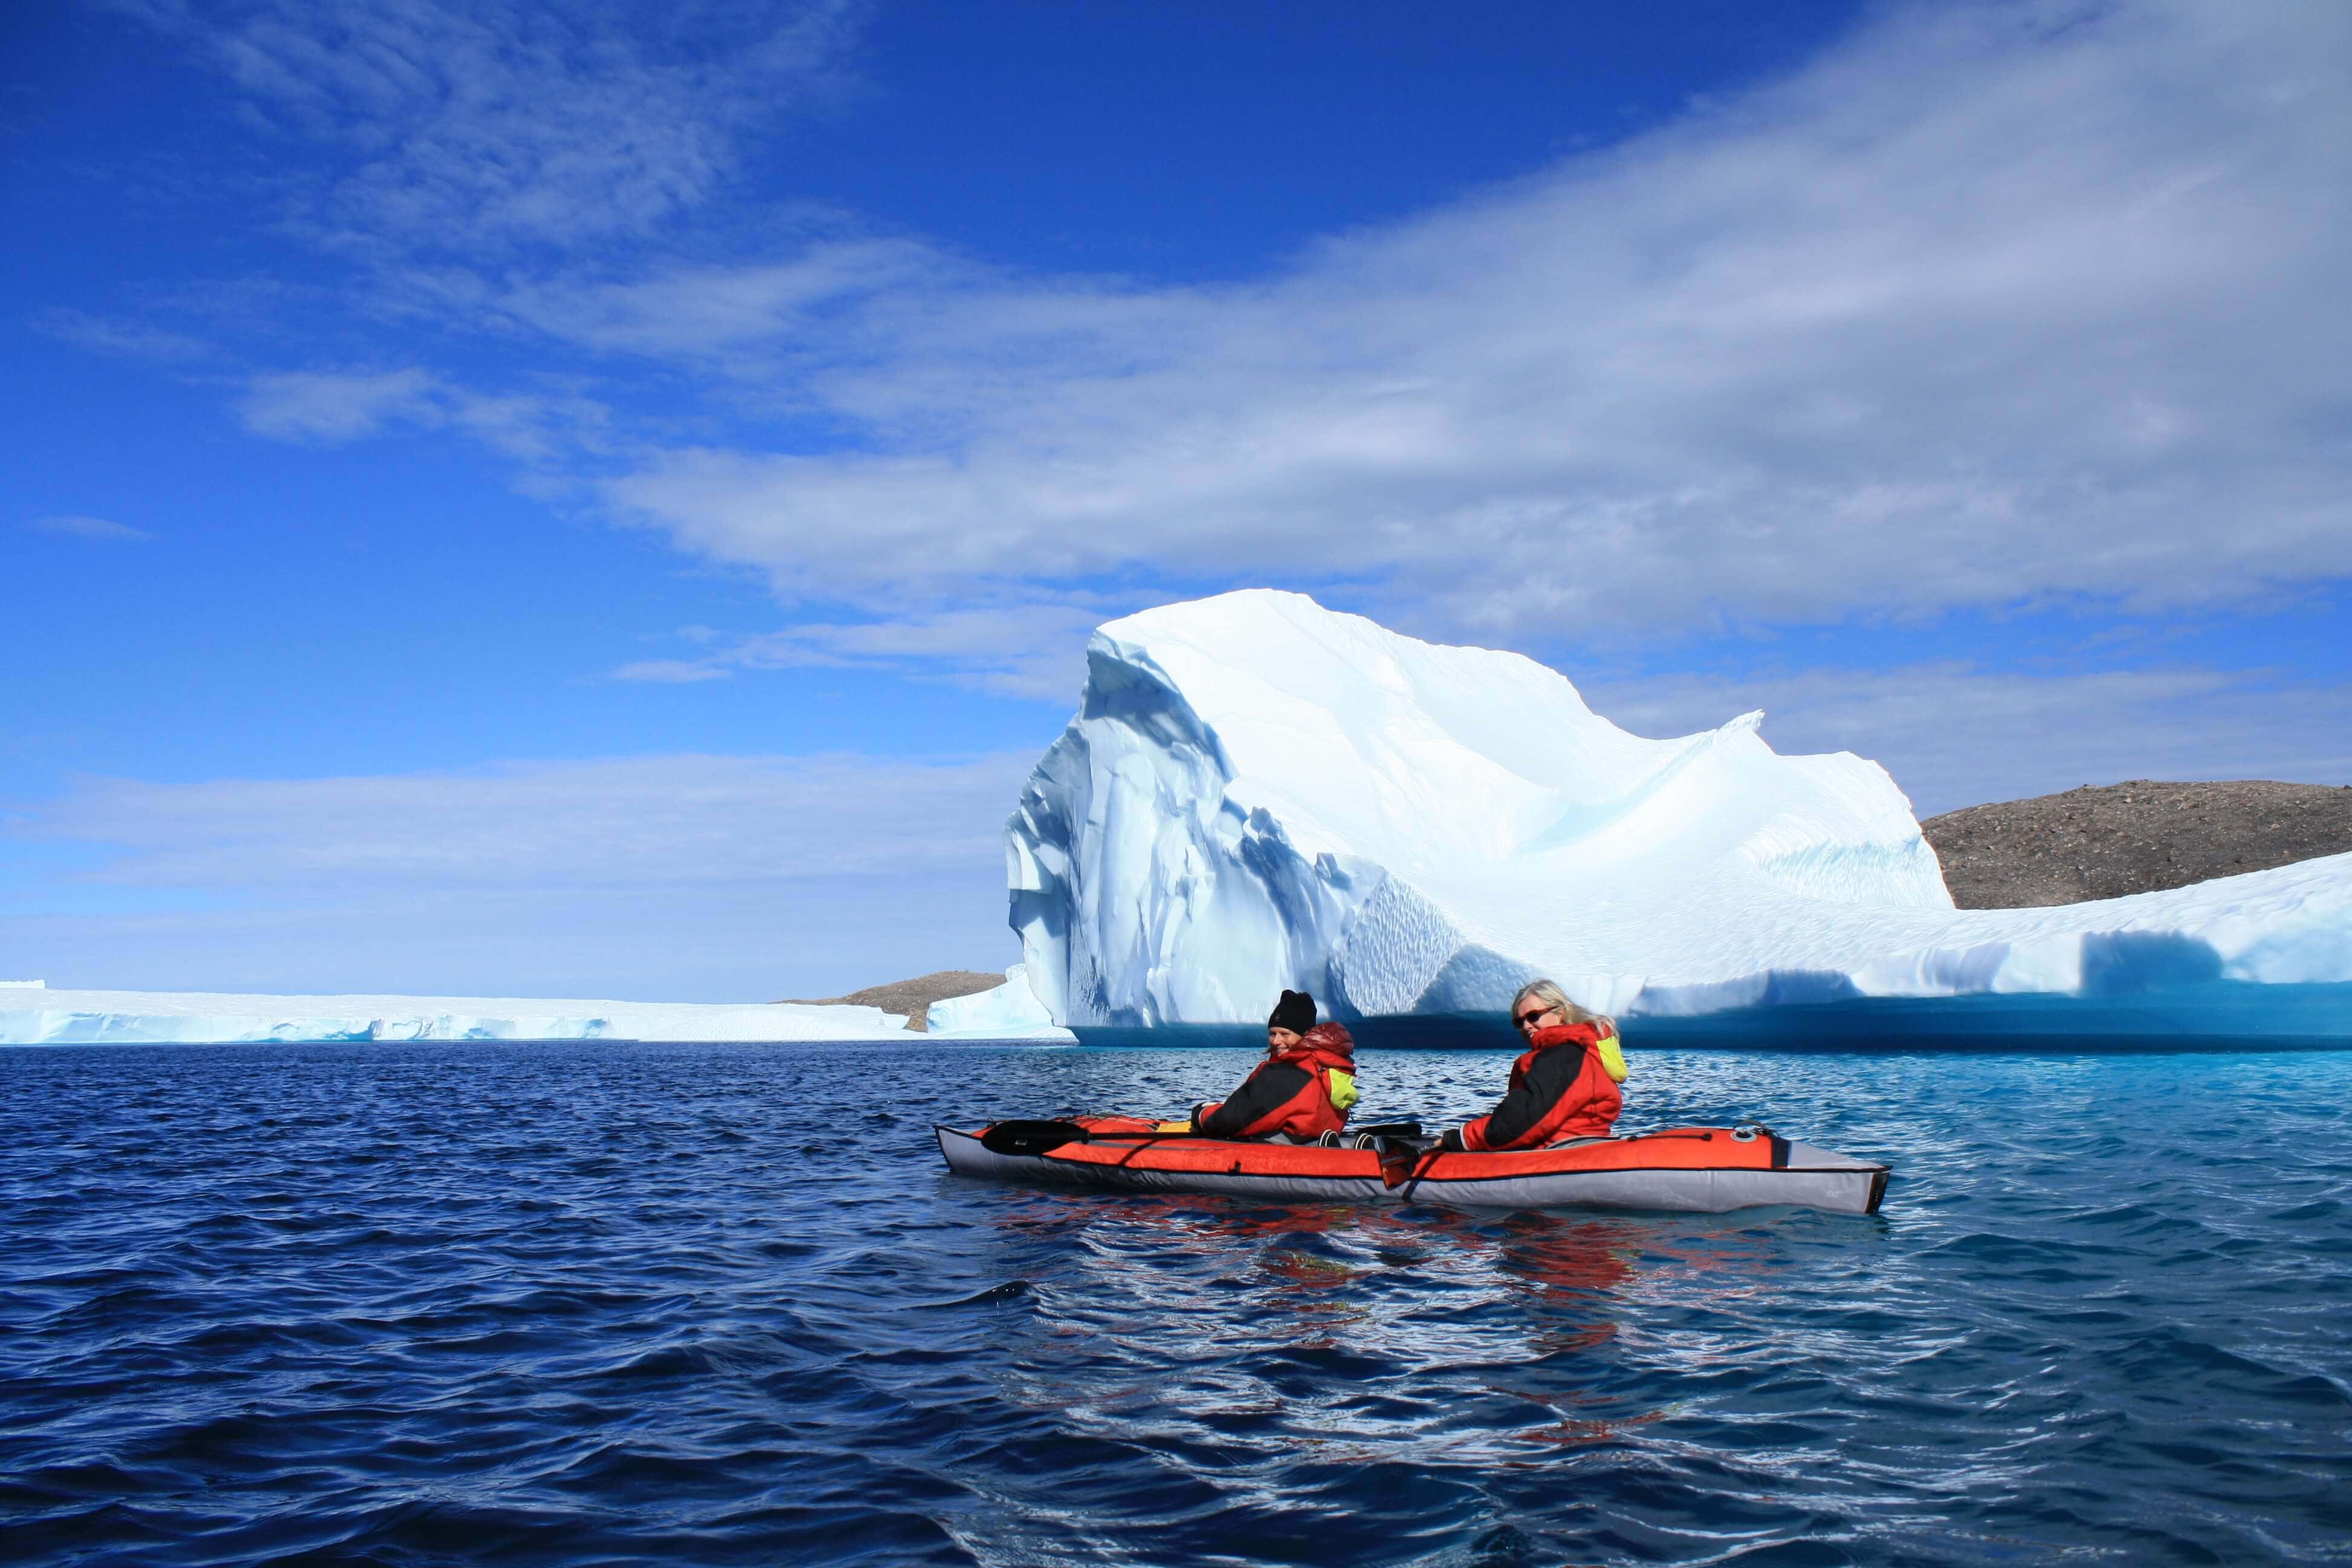 29 of the most unforgettable travel experiences in the world - Kayaking among icebergs in Nunavut, Canada